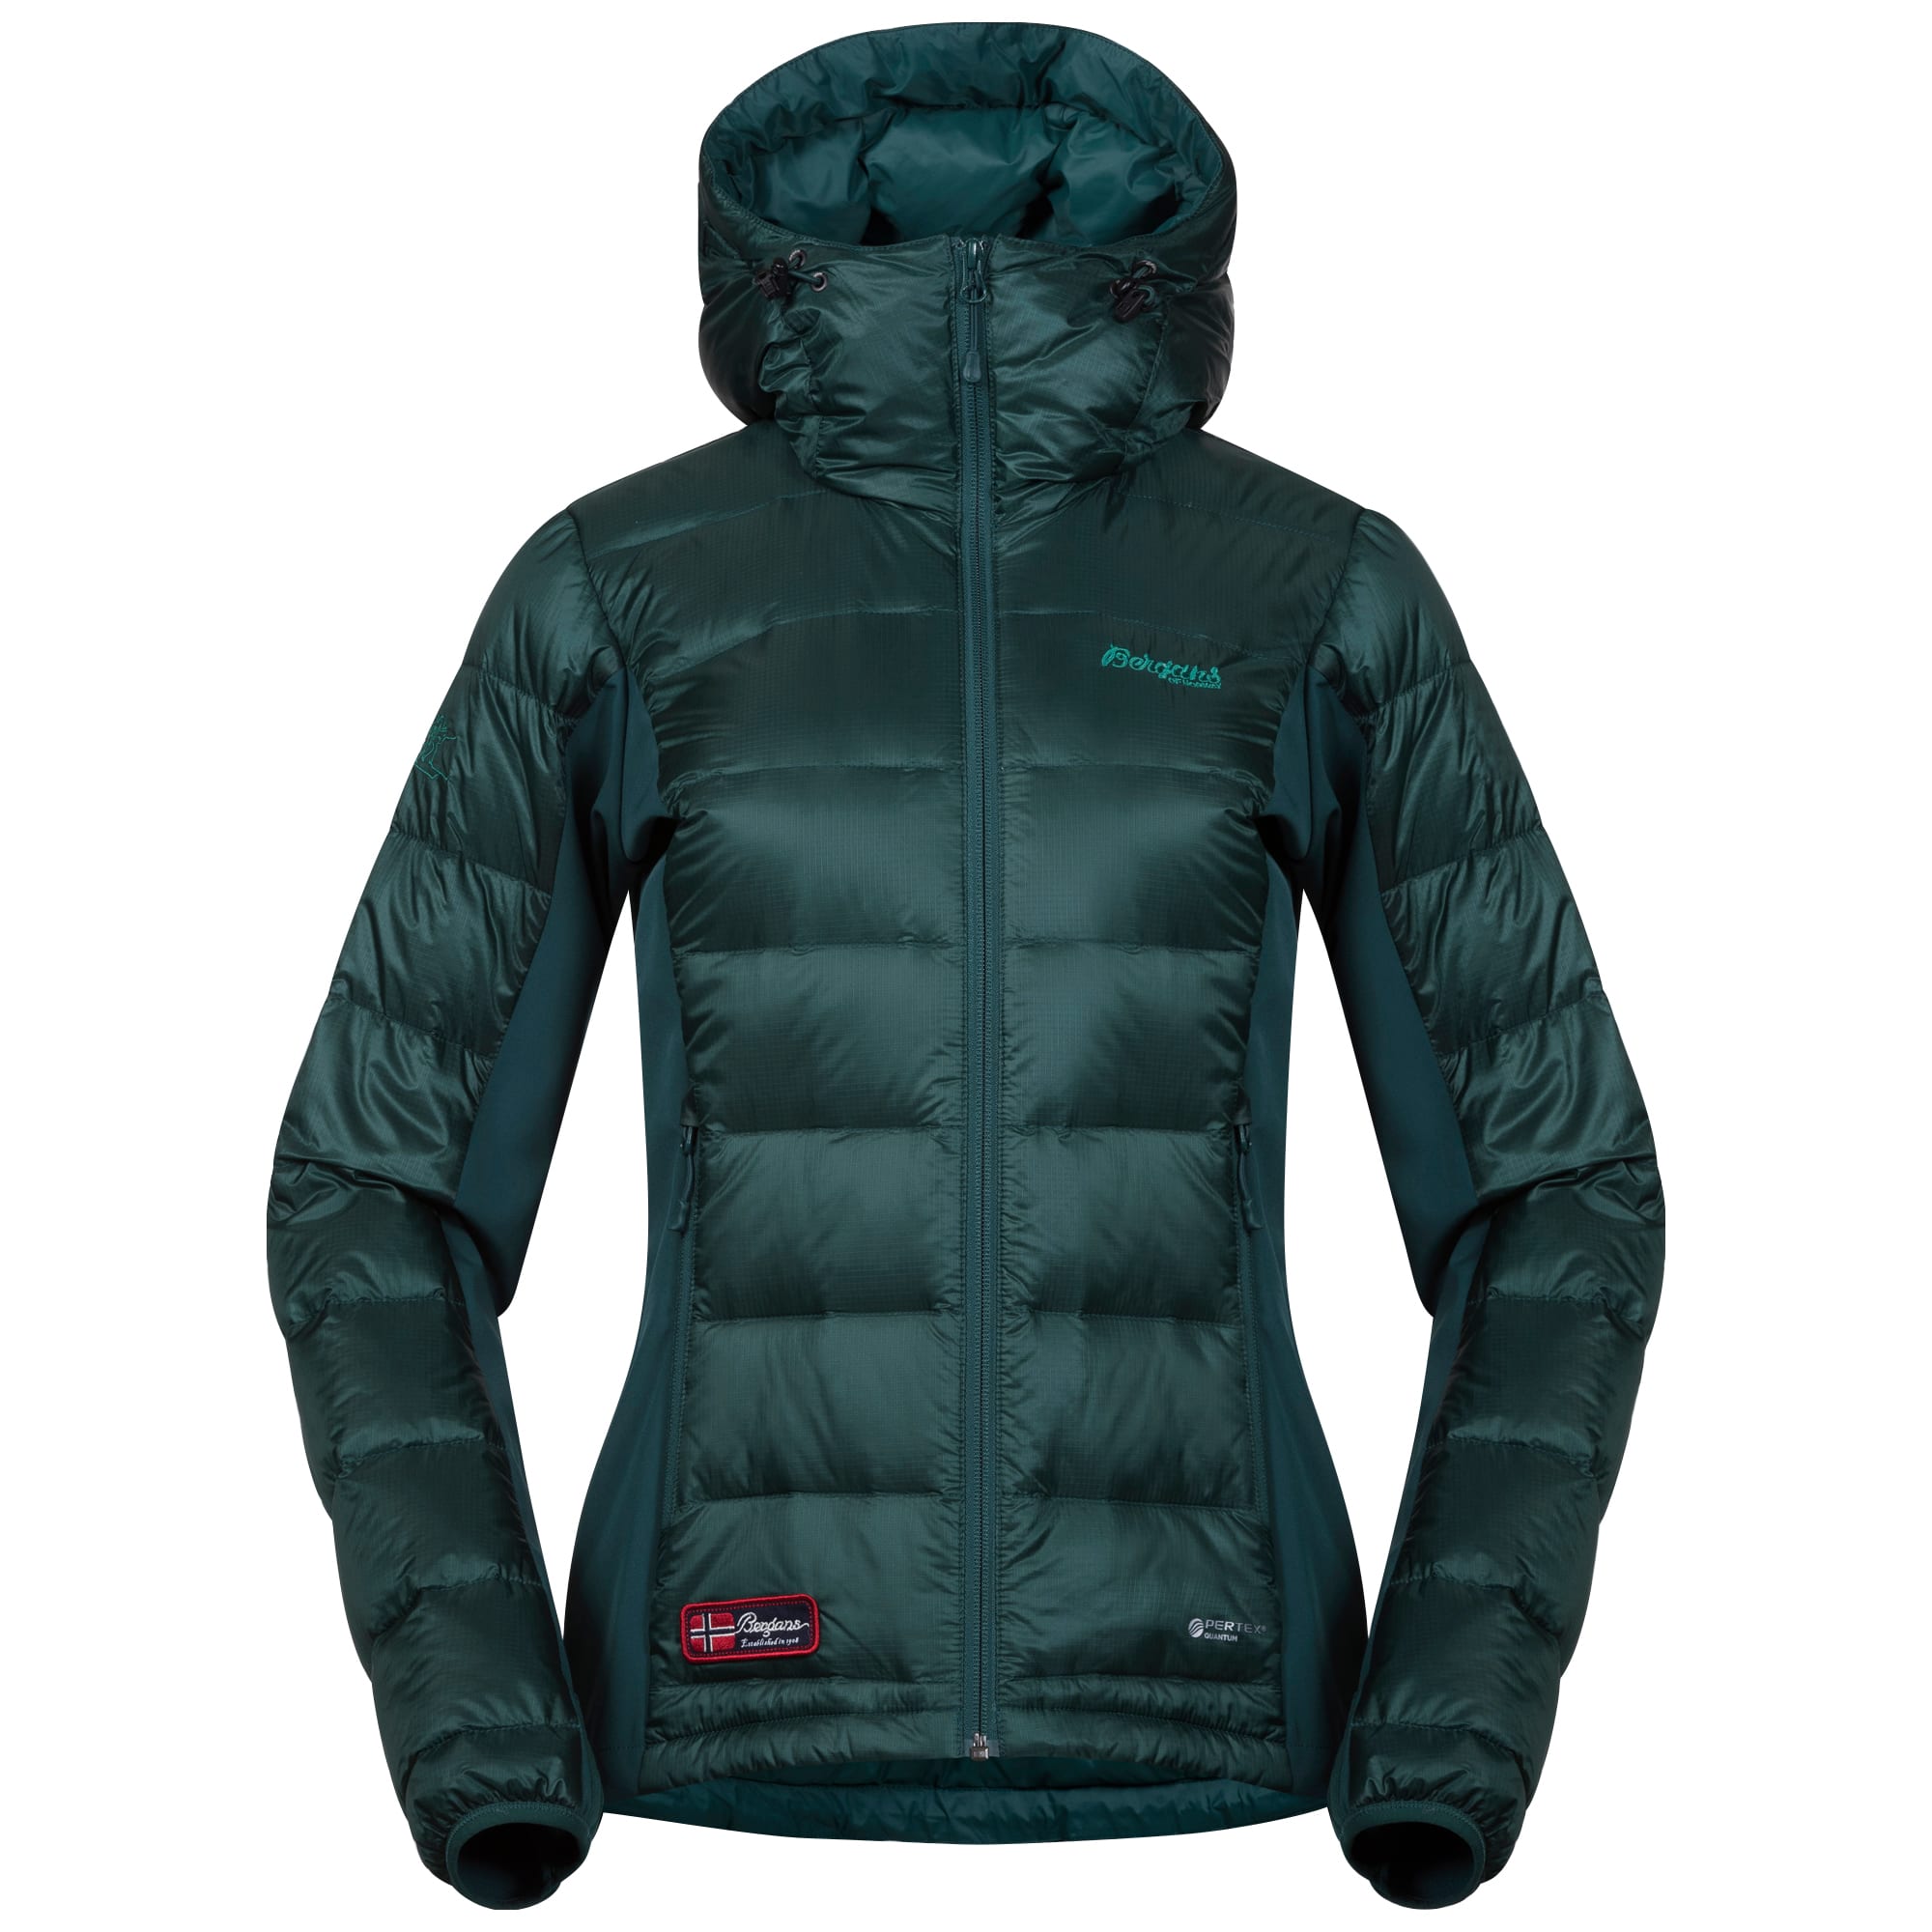 Buy Bergans Women's Myre Down Jacket from Outnorth